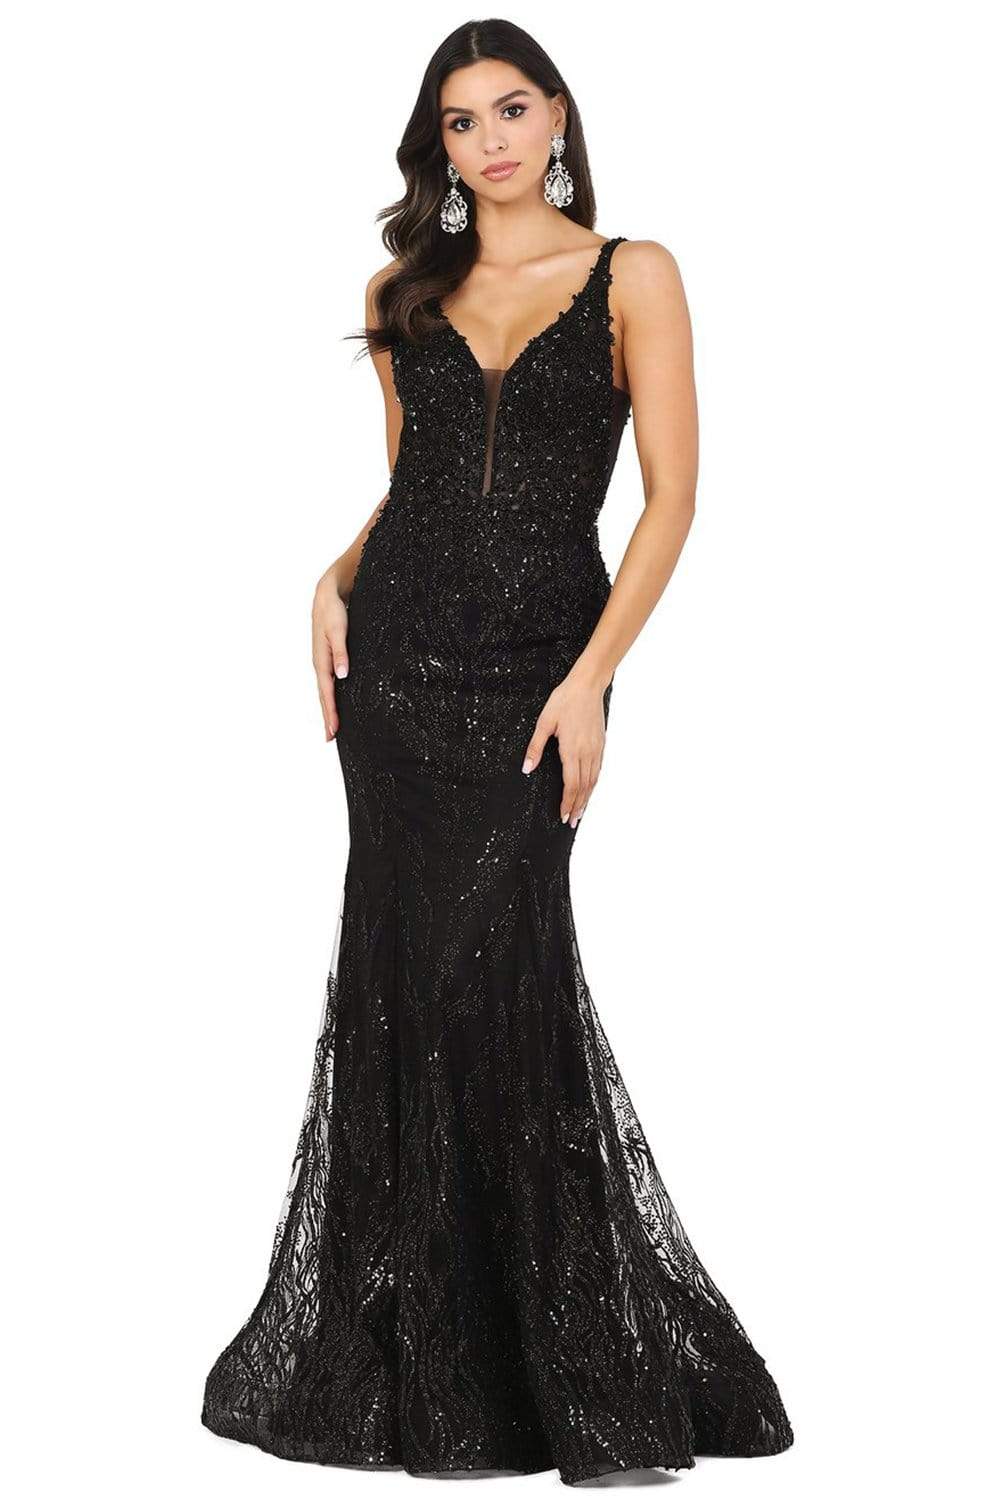 Dancing Queen - 2963 Low Scoop Back V-Neck Embellished Trumpet Dress - 1 pc Black In Size XS Available CCSALE XS / Black